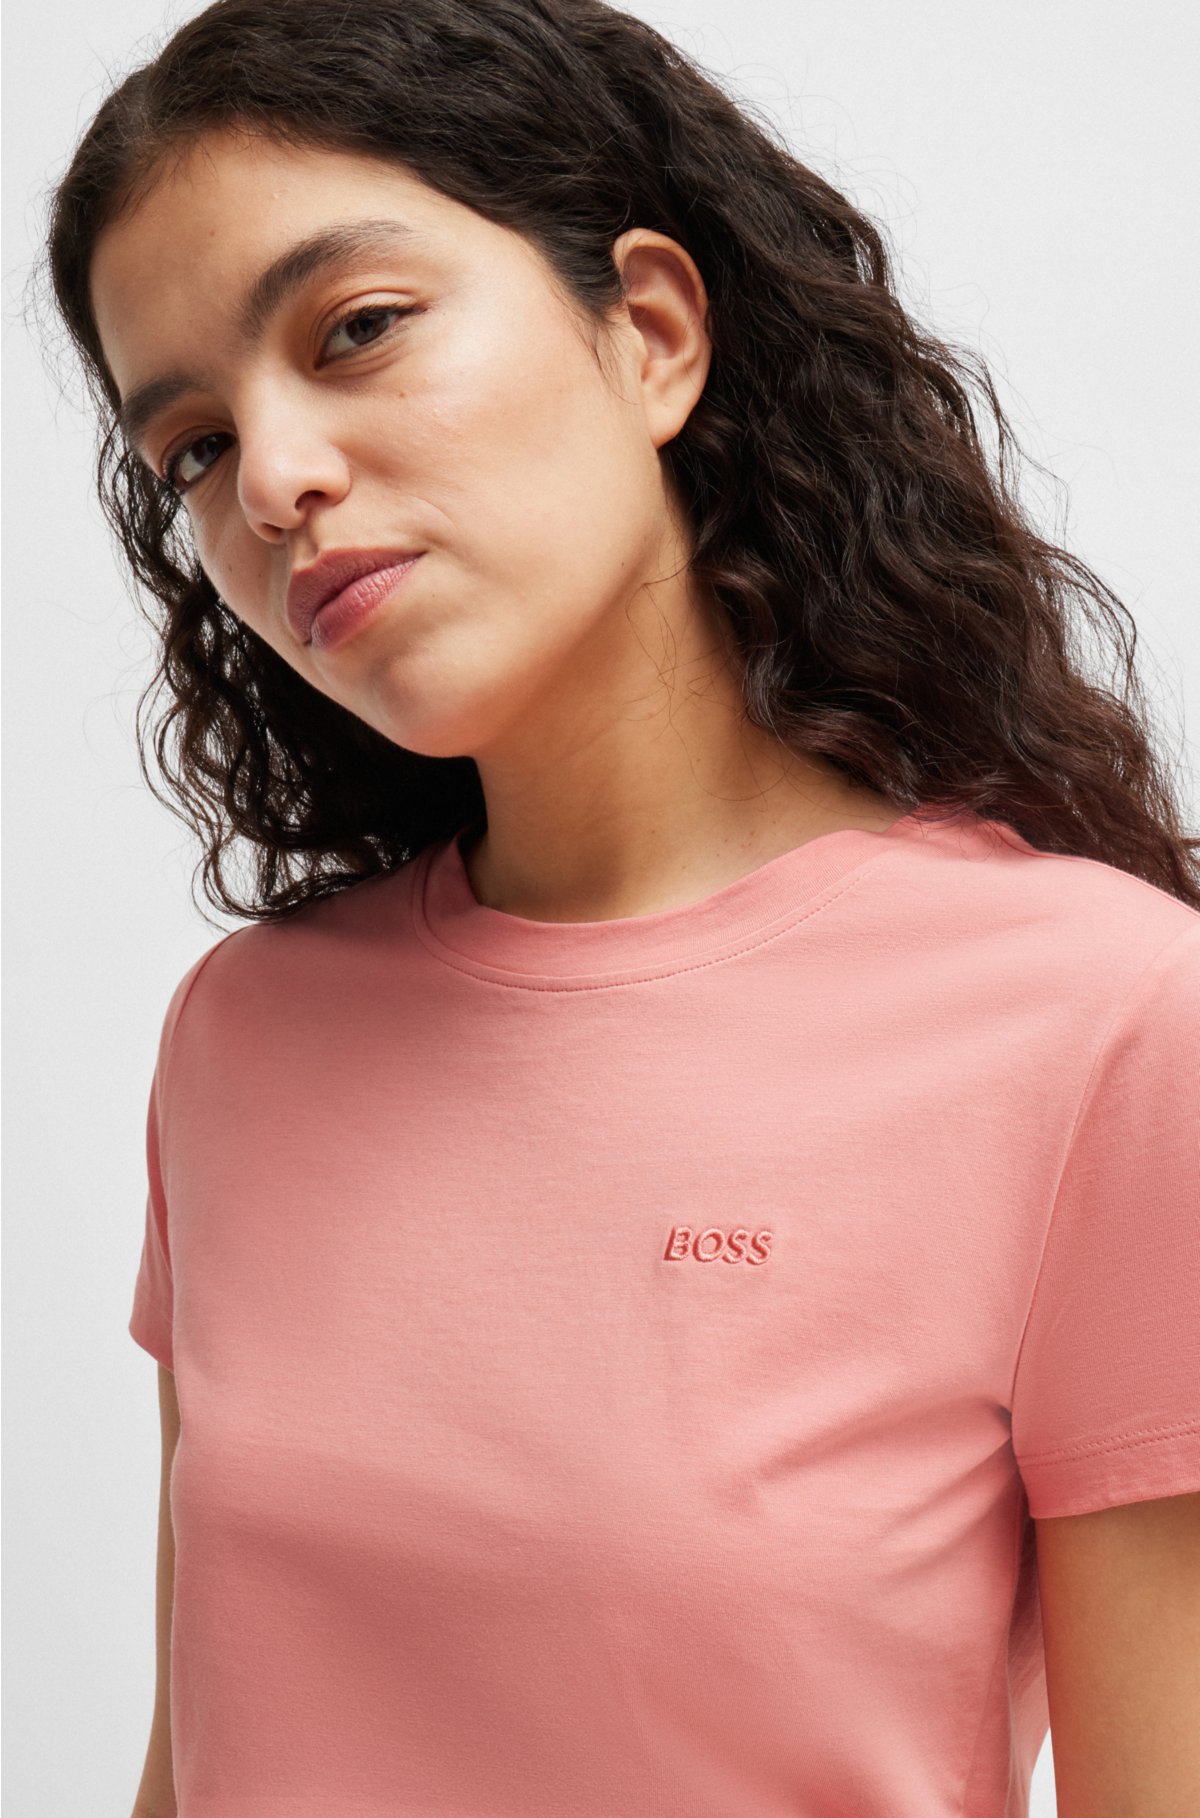 Cotton-jersey slim-fit T-shirt with logo detail, light pink